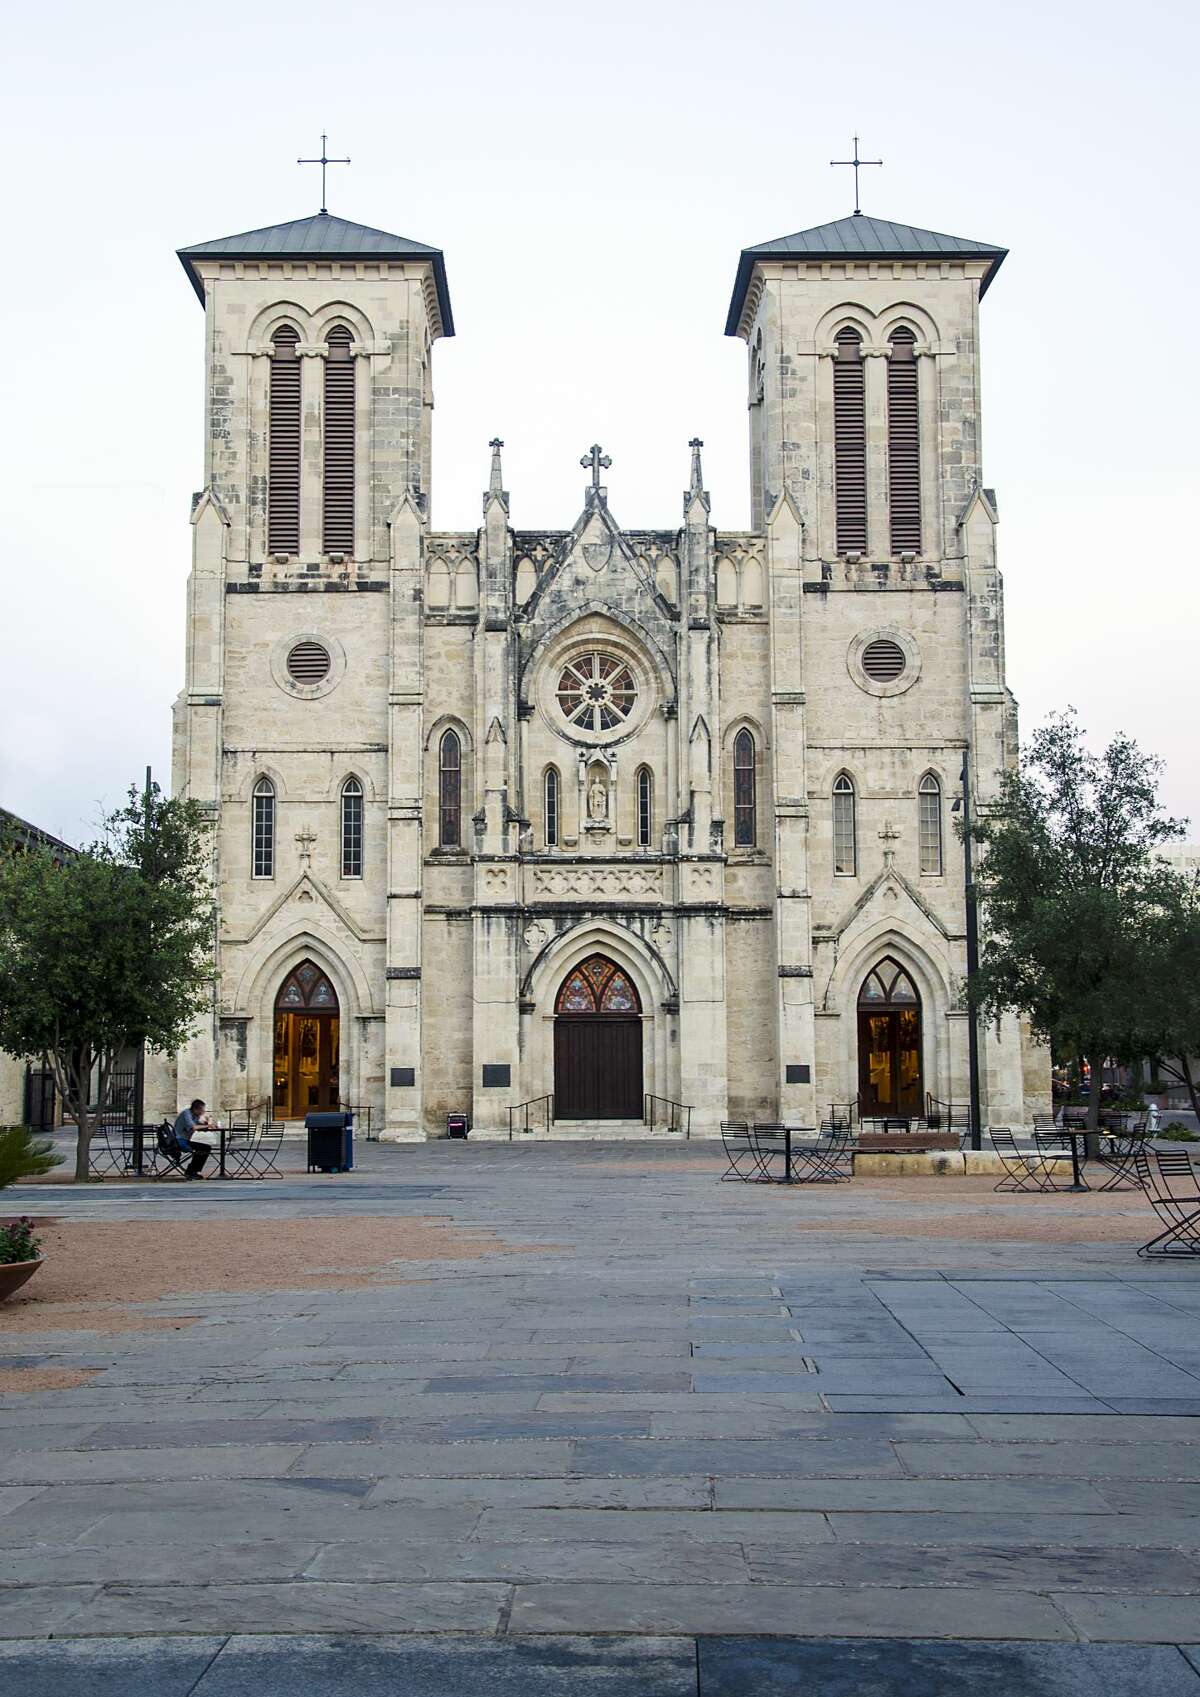 The San Fernando Cathedral: Built in 1750, the San Fernando Cathedral is the oldest church in Texas with a rich history. Visitors have reported seeing shadowy figures and bright orbs appearing in photographs. Some have even said they saw a man dressed in monk-like robes near the back of the cathedral, and a white stallion galloping across the front. 